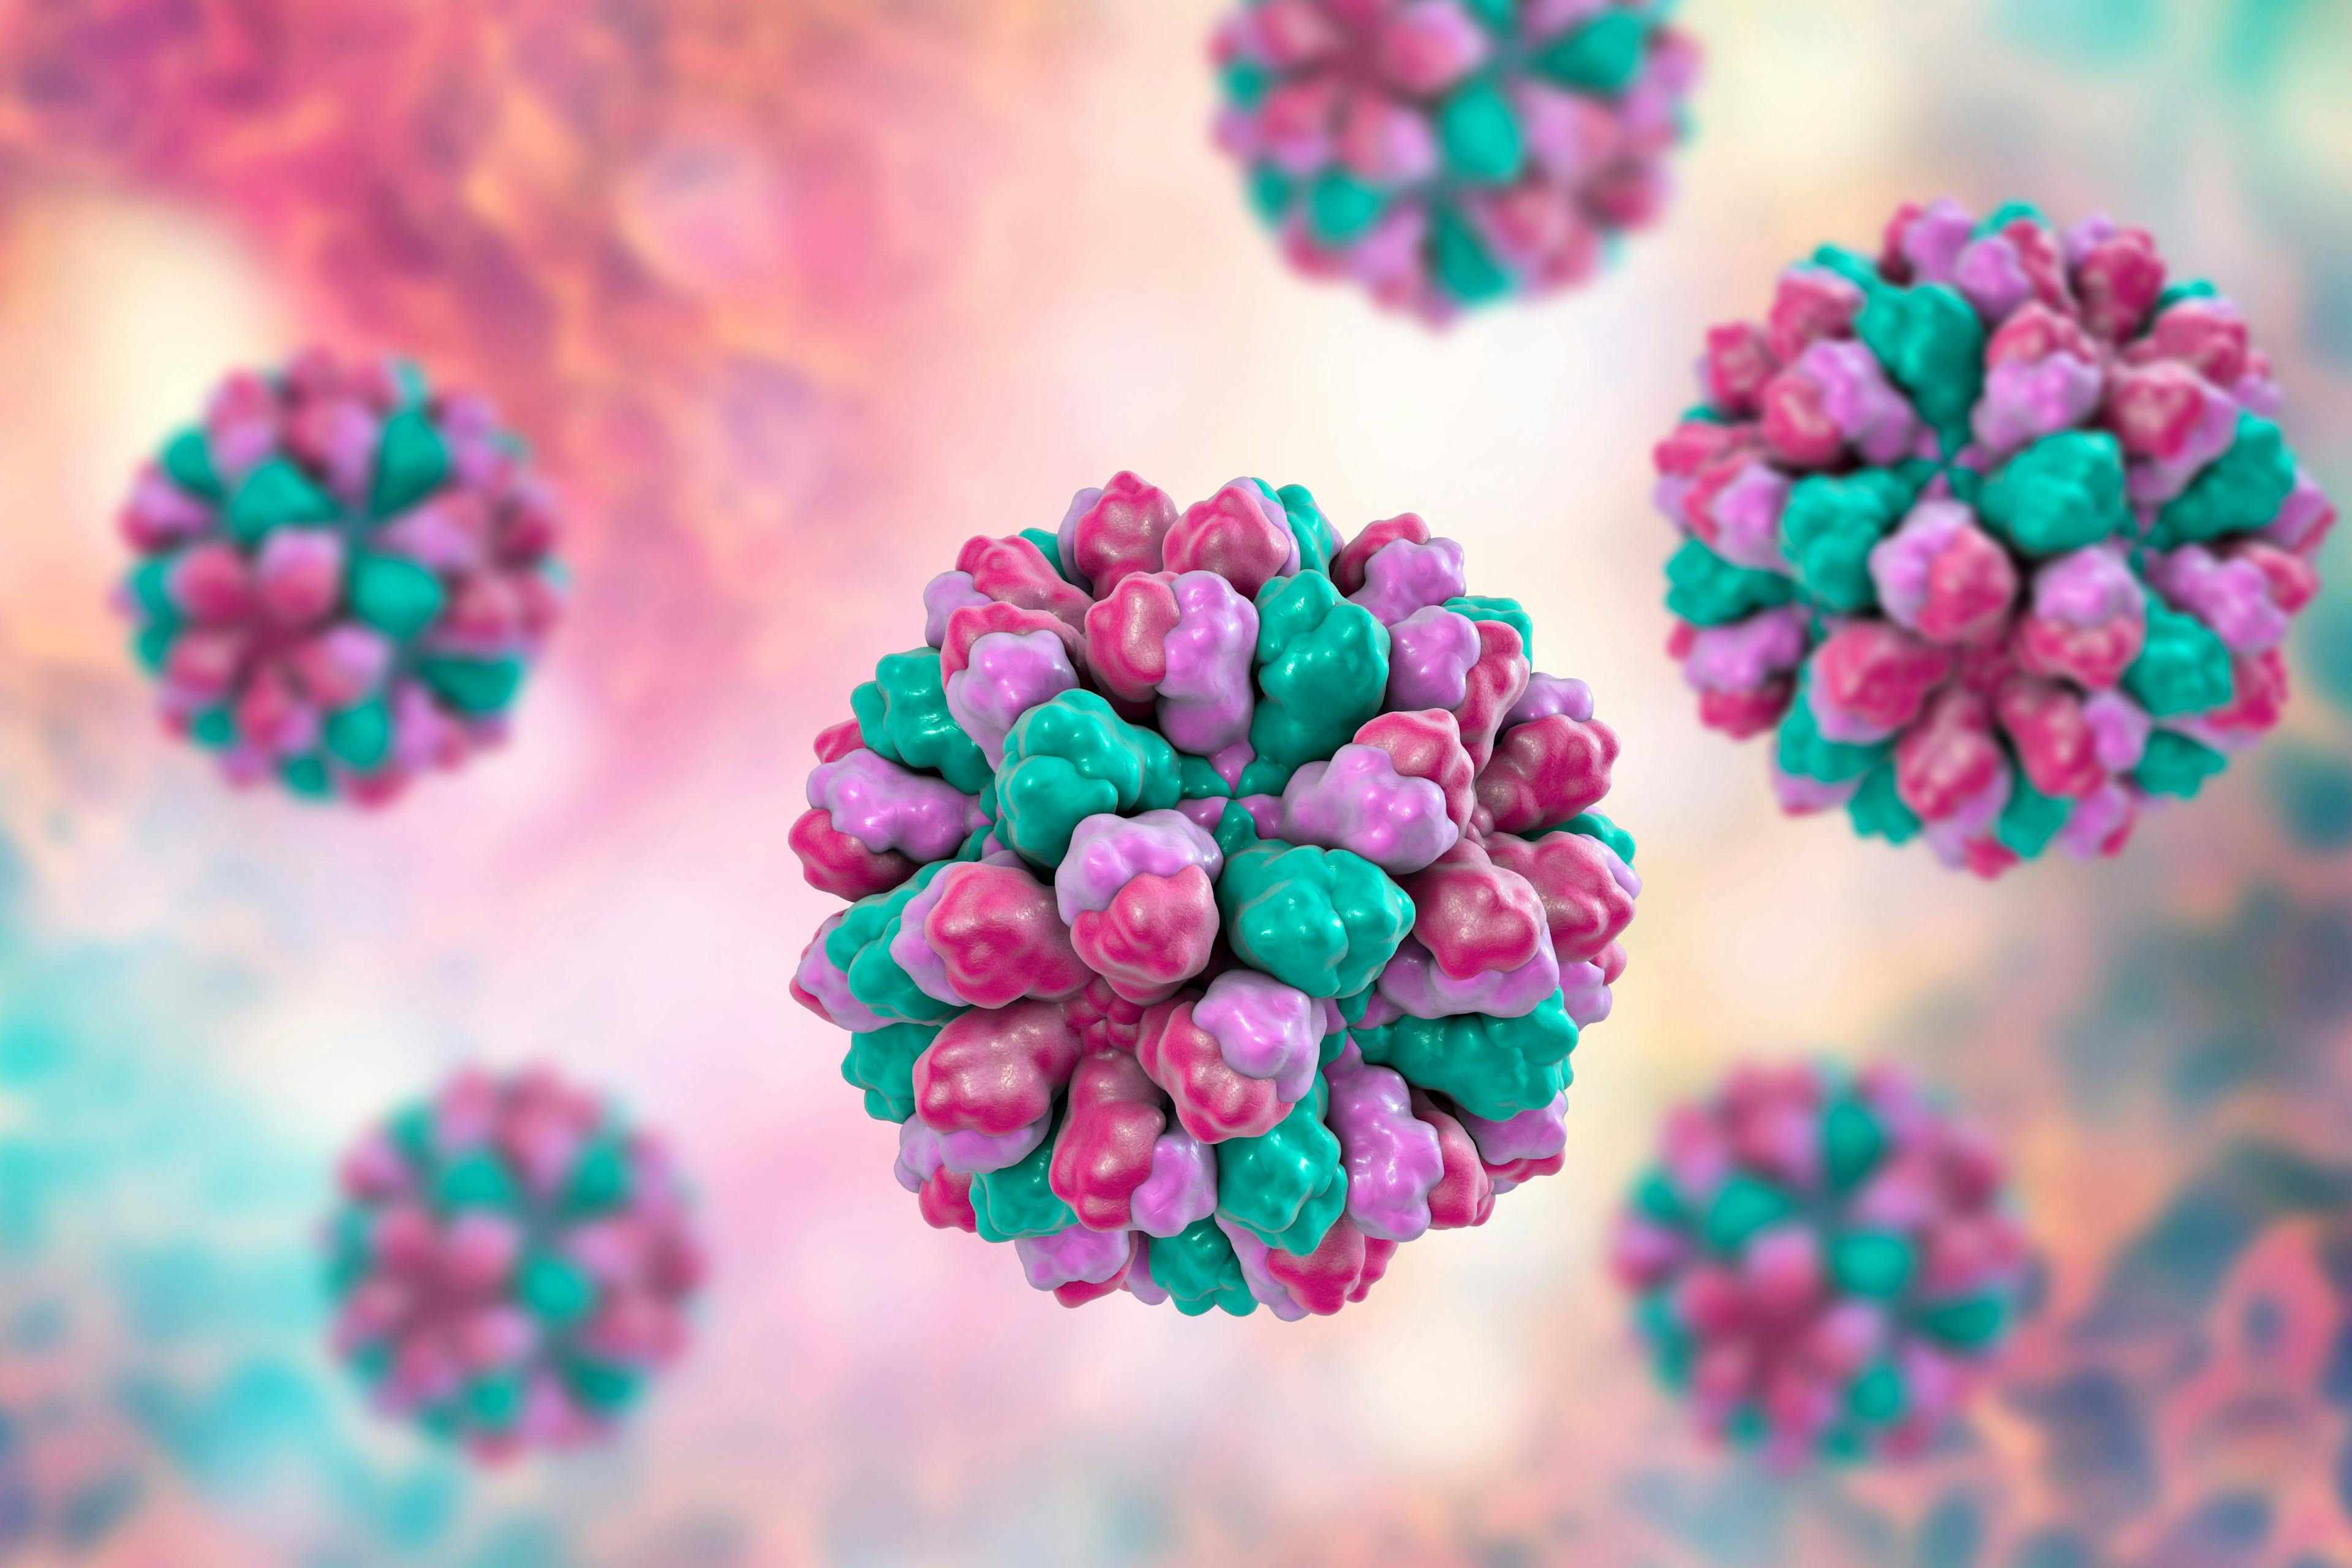 What to Know About Norovirus, the Highly Contagious “Stomach Flu” That Isn’t Influenza 